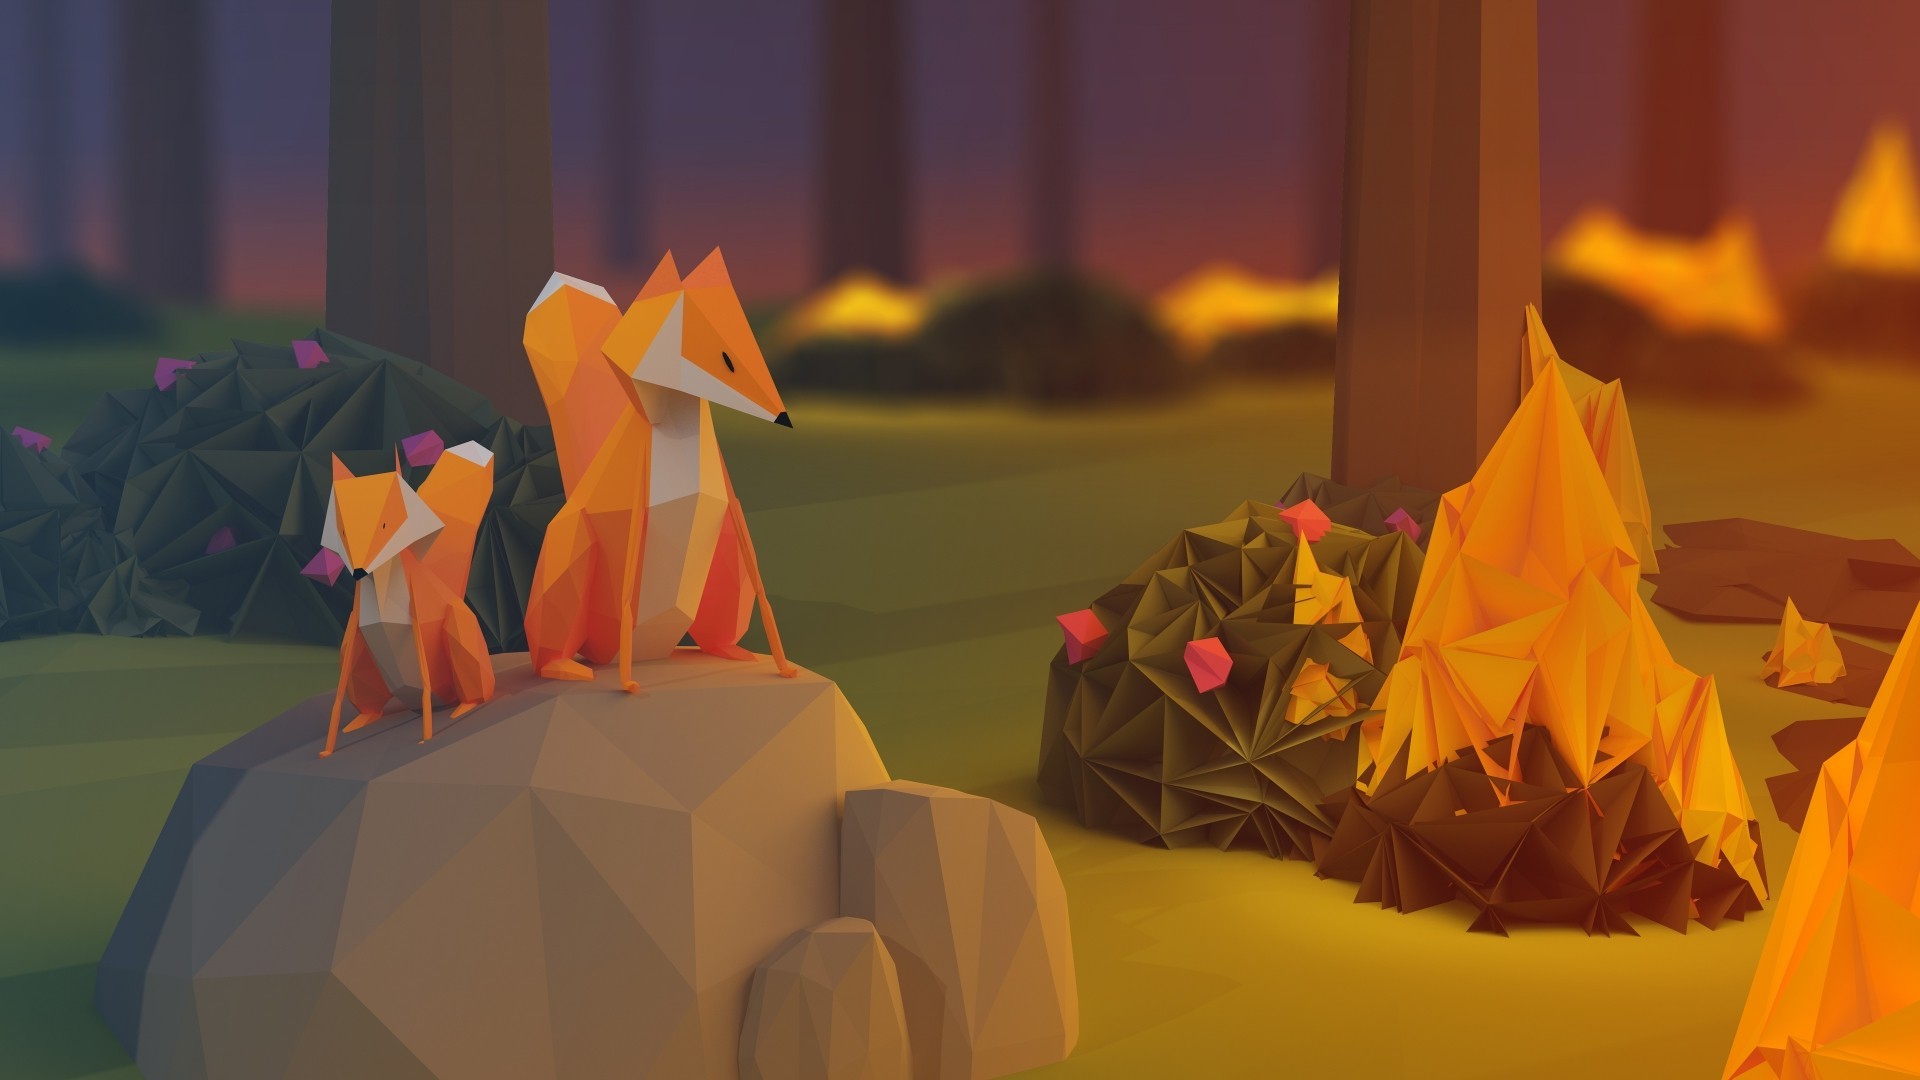 anime, Paper, Poly, Fire, Minimalism, Nature, Fox, Rock, Low poly, Digital art, Stones, Plants, Trees, Flowers, Baby animals Wallpaper